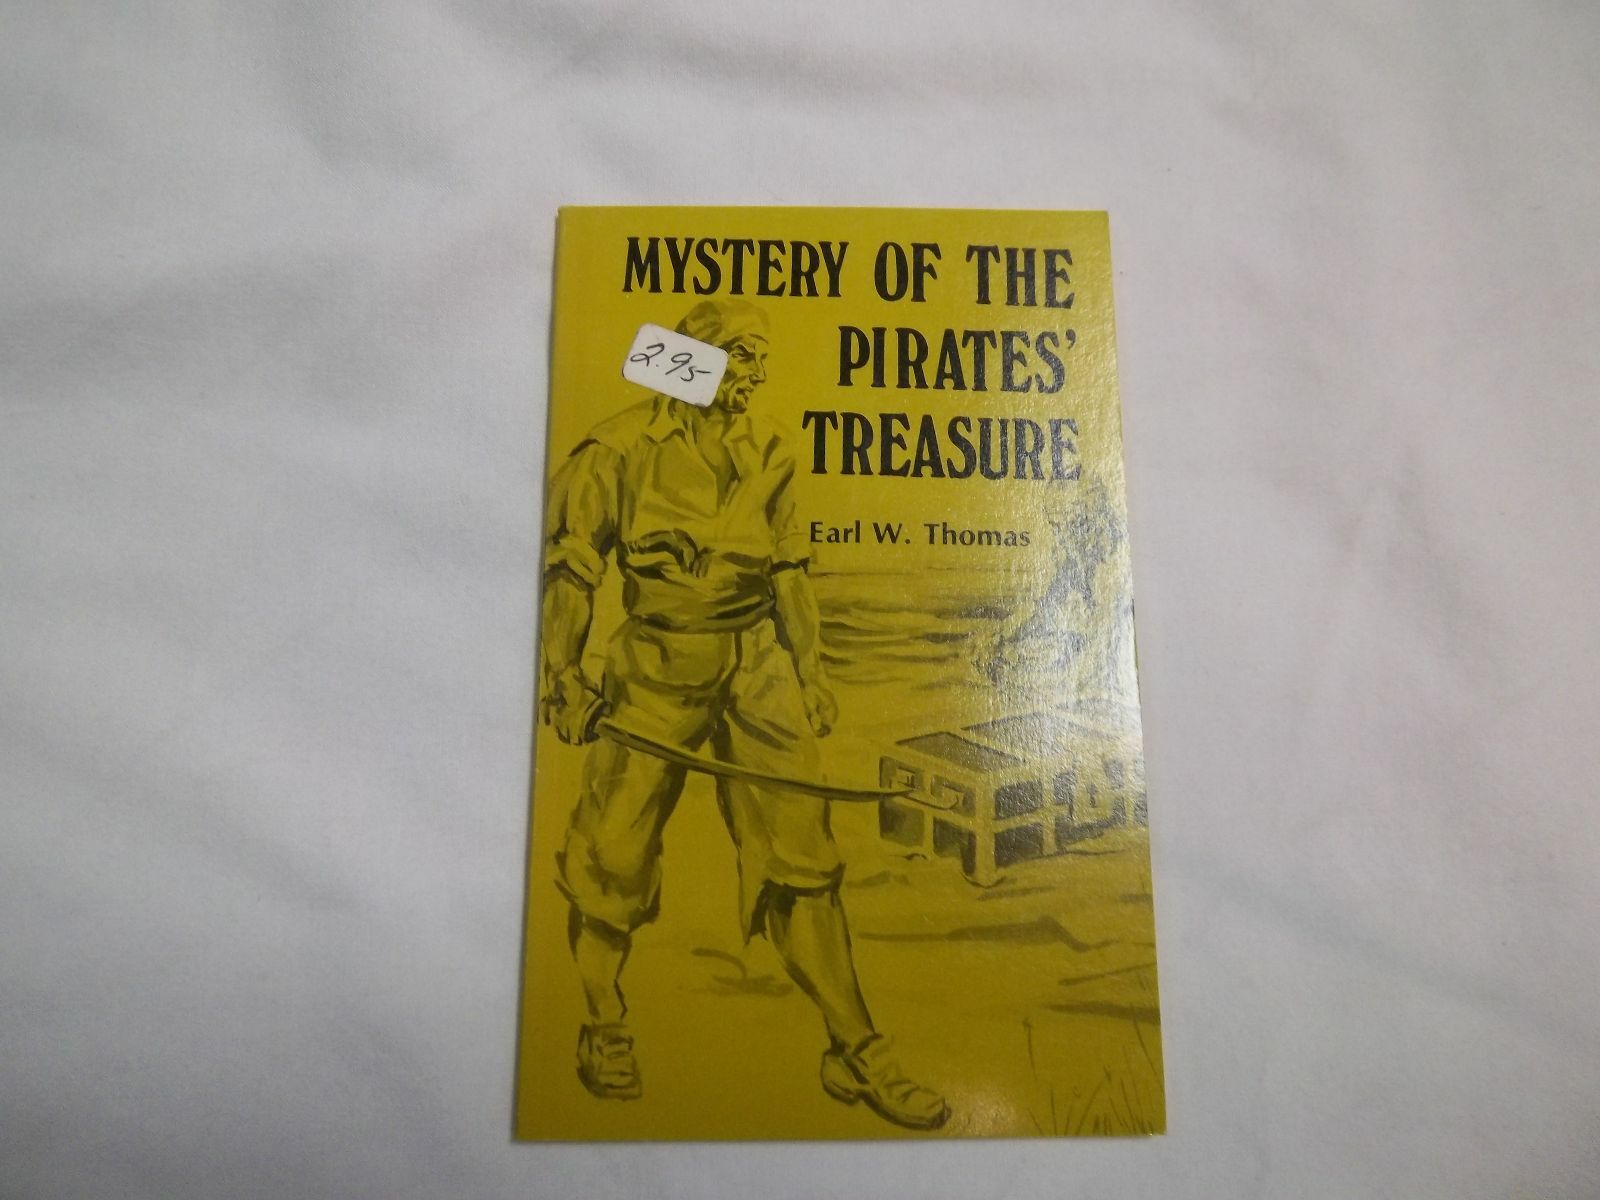 MYSTERY OF THE PIRATES' TREASURE BY EARL W. THOMAS (PAPERBACK)